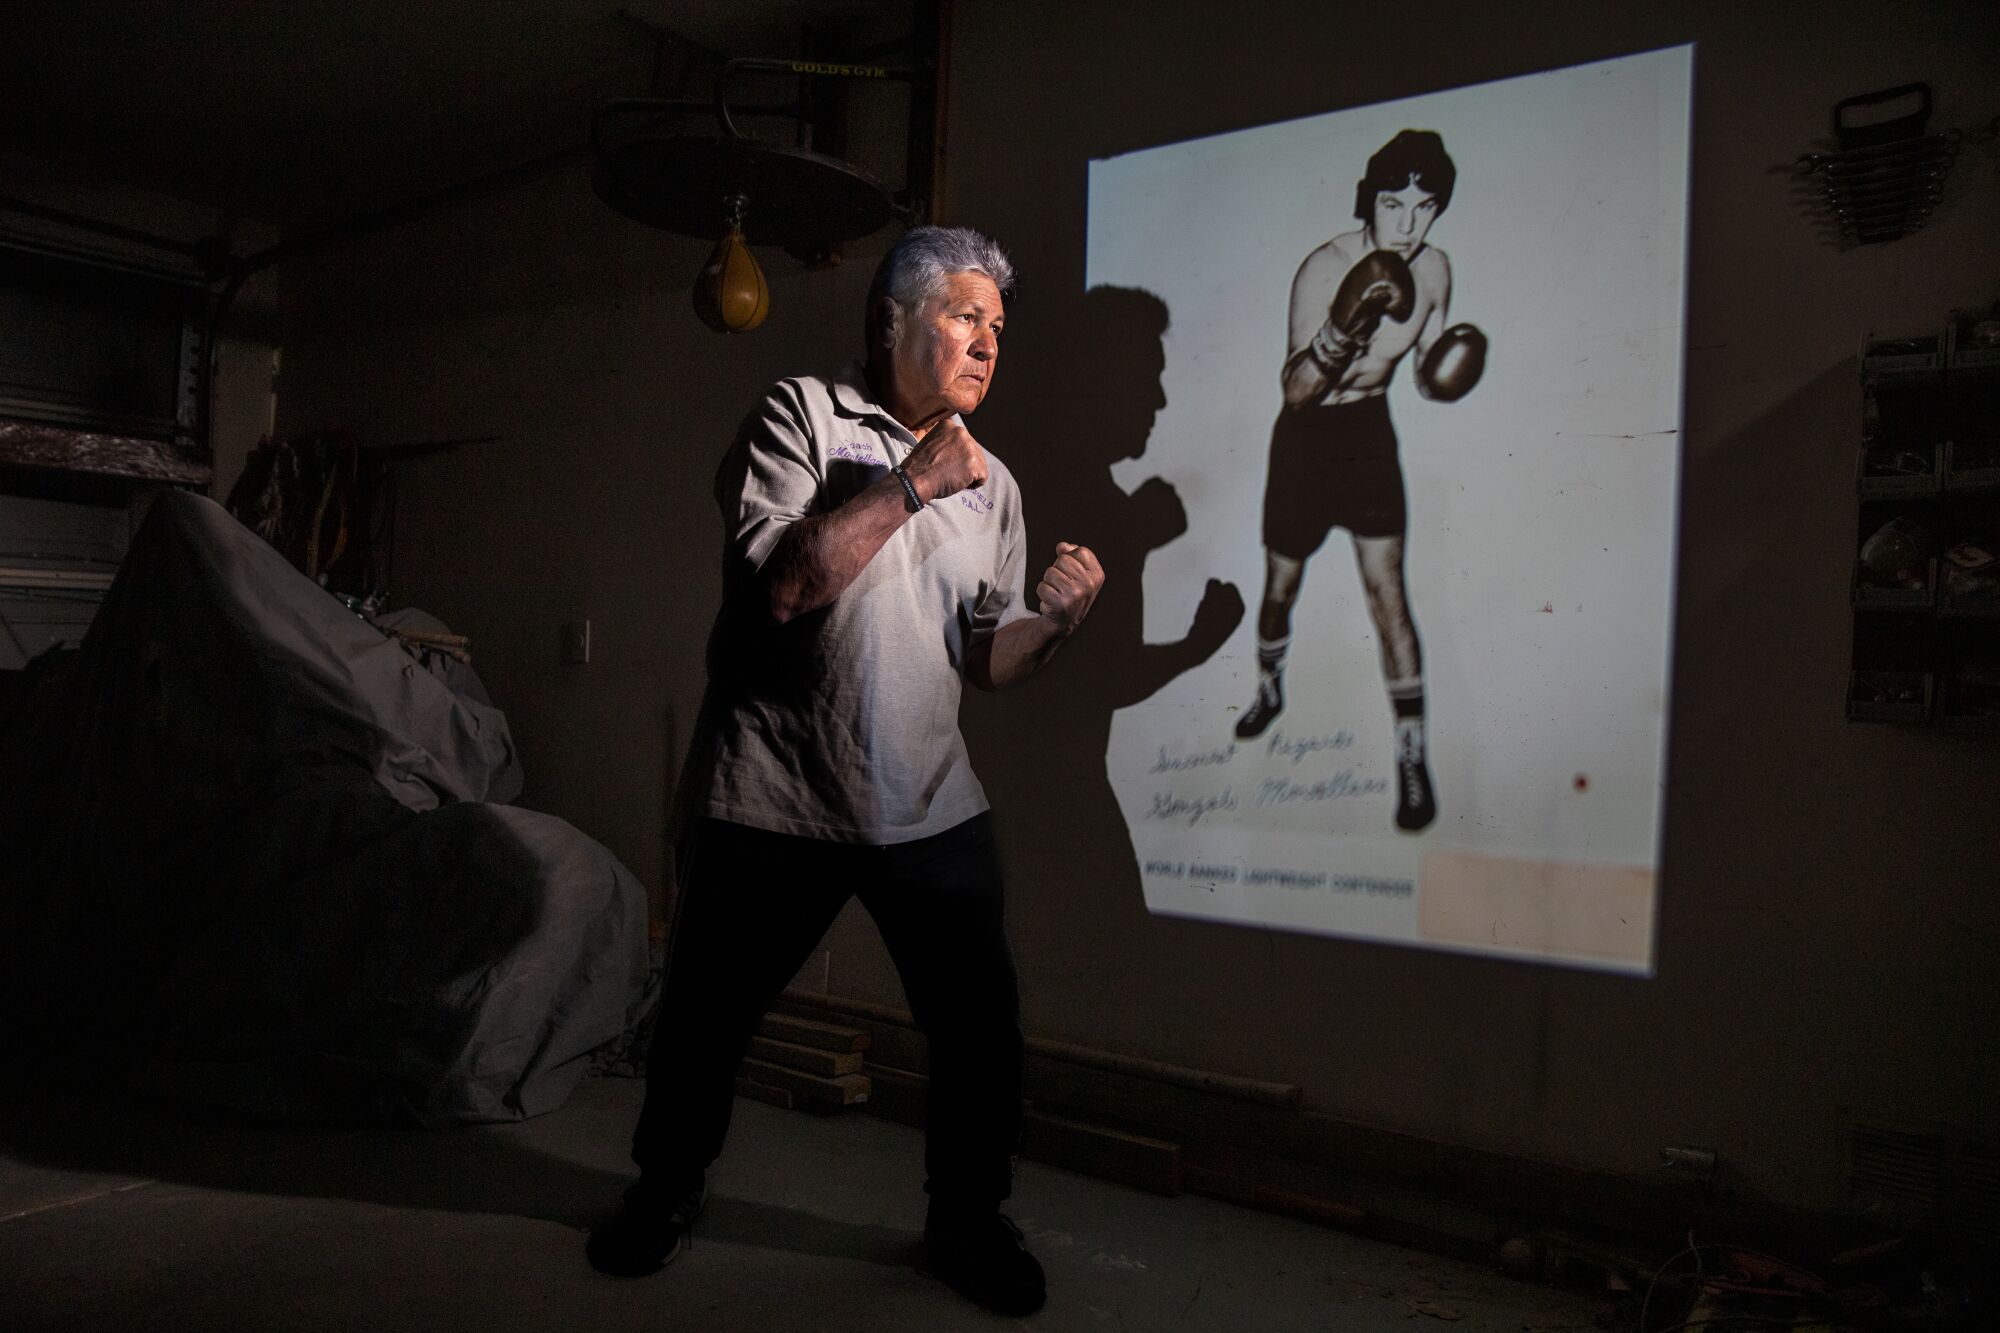  Gonzalo Montellano is shown shadow boxing in front of a boxing photo.